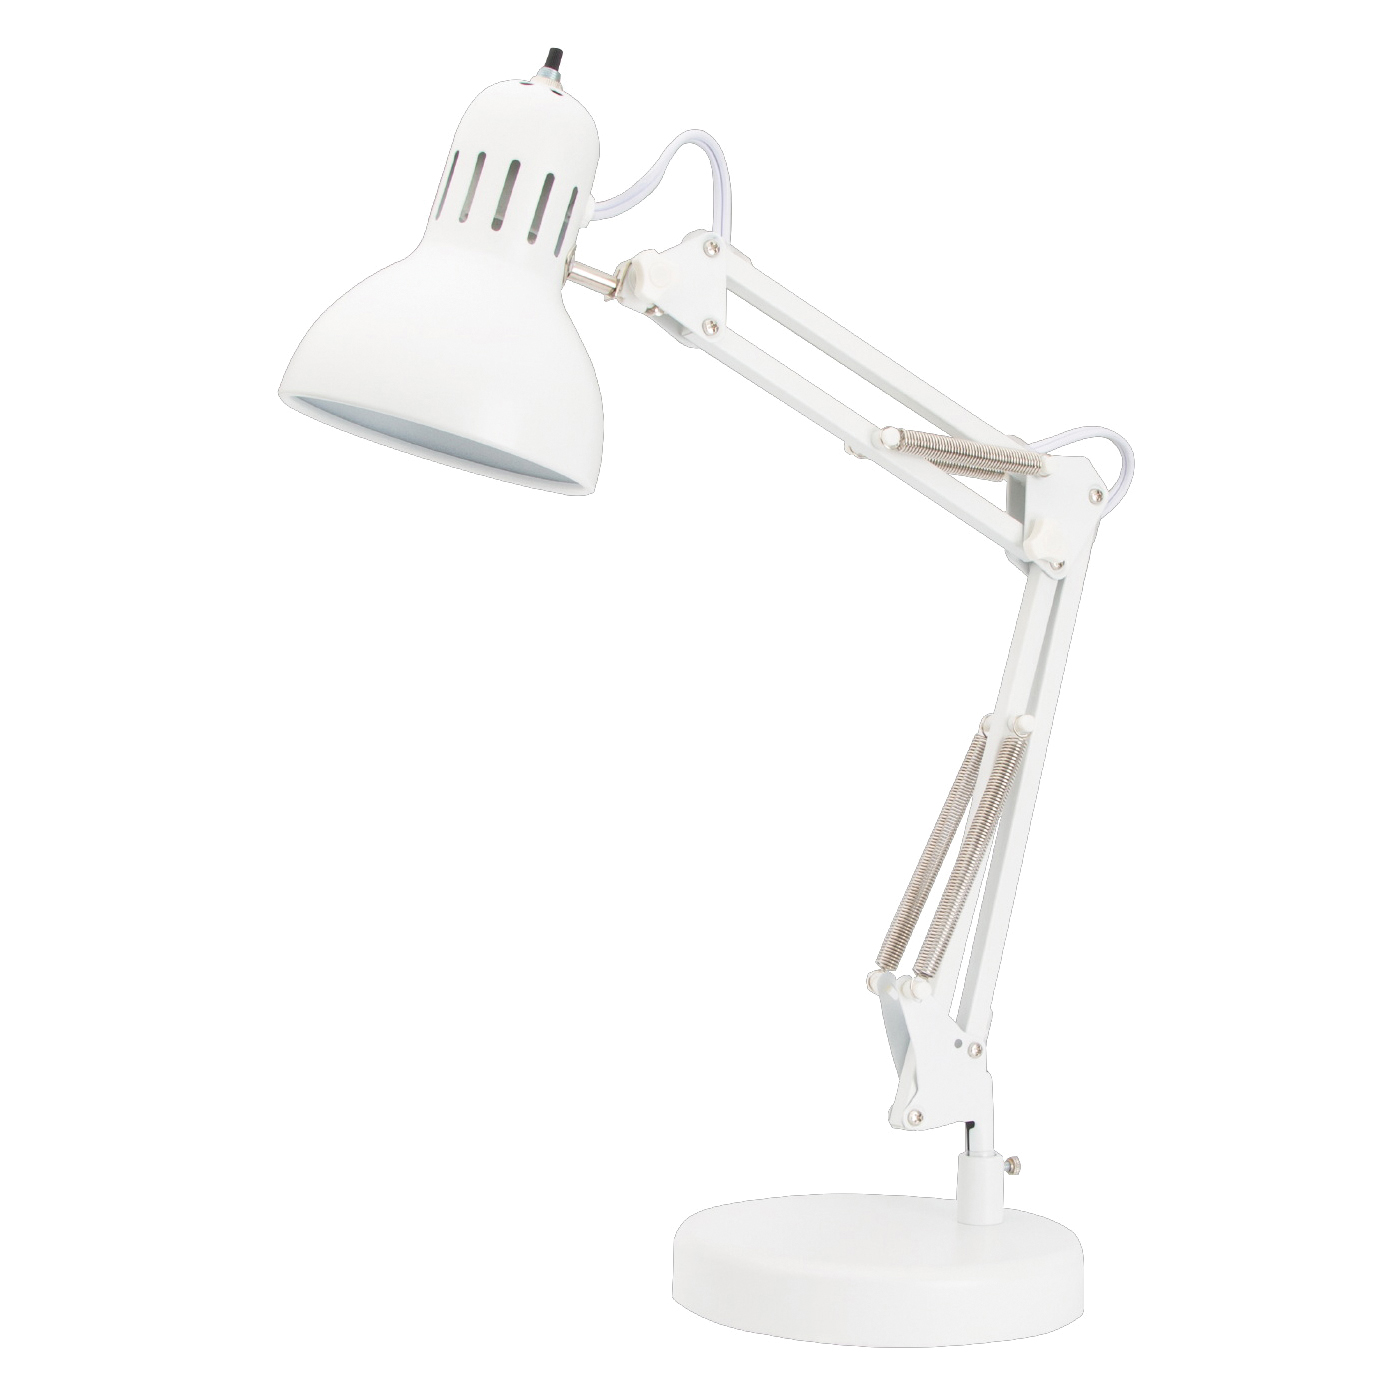 Boston Harbor TL-WK-134E-WH-3L Swing Arm Work Lamp, 120 V, 60 W, 1-Lamp, A19 or CFL Lamp, White - 1